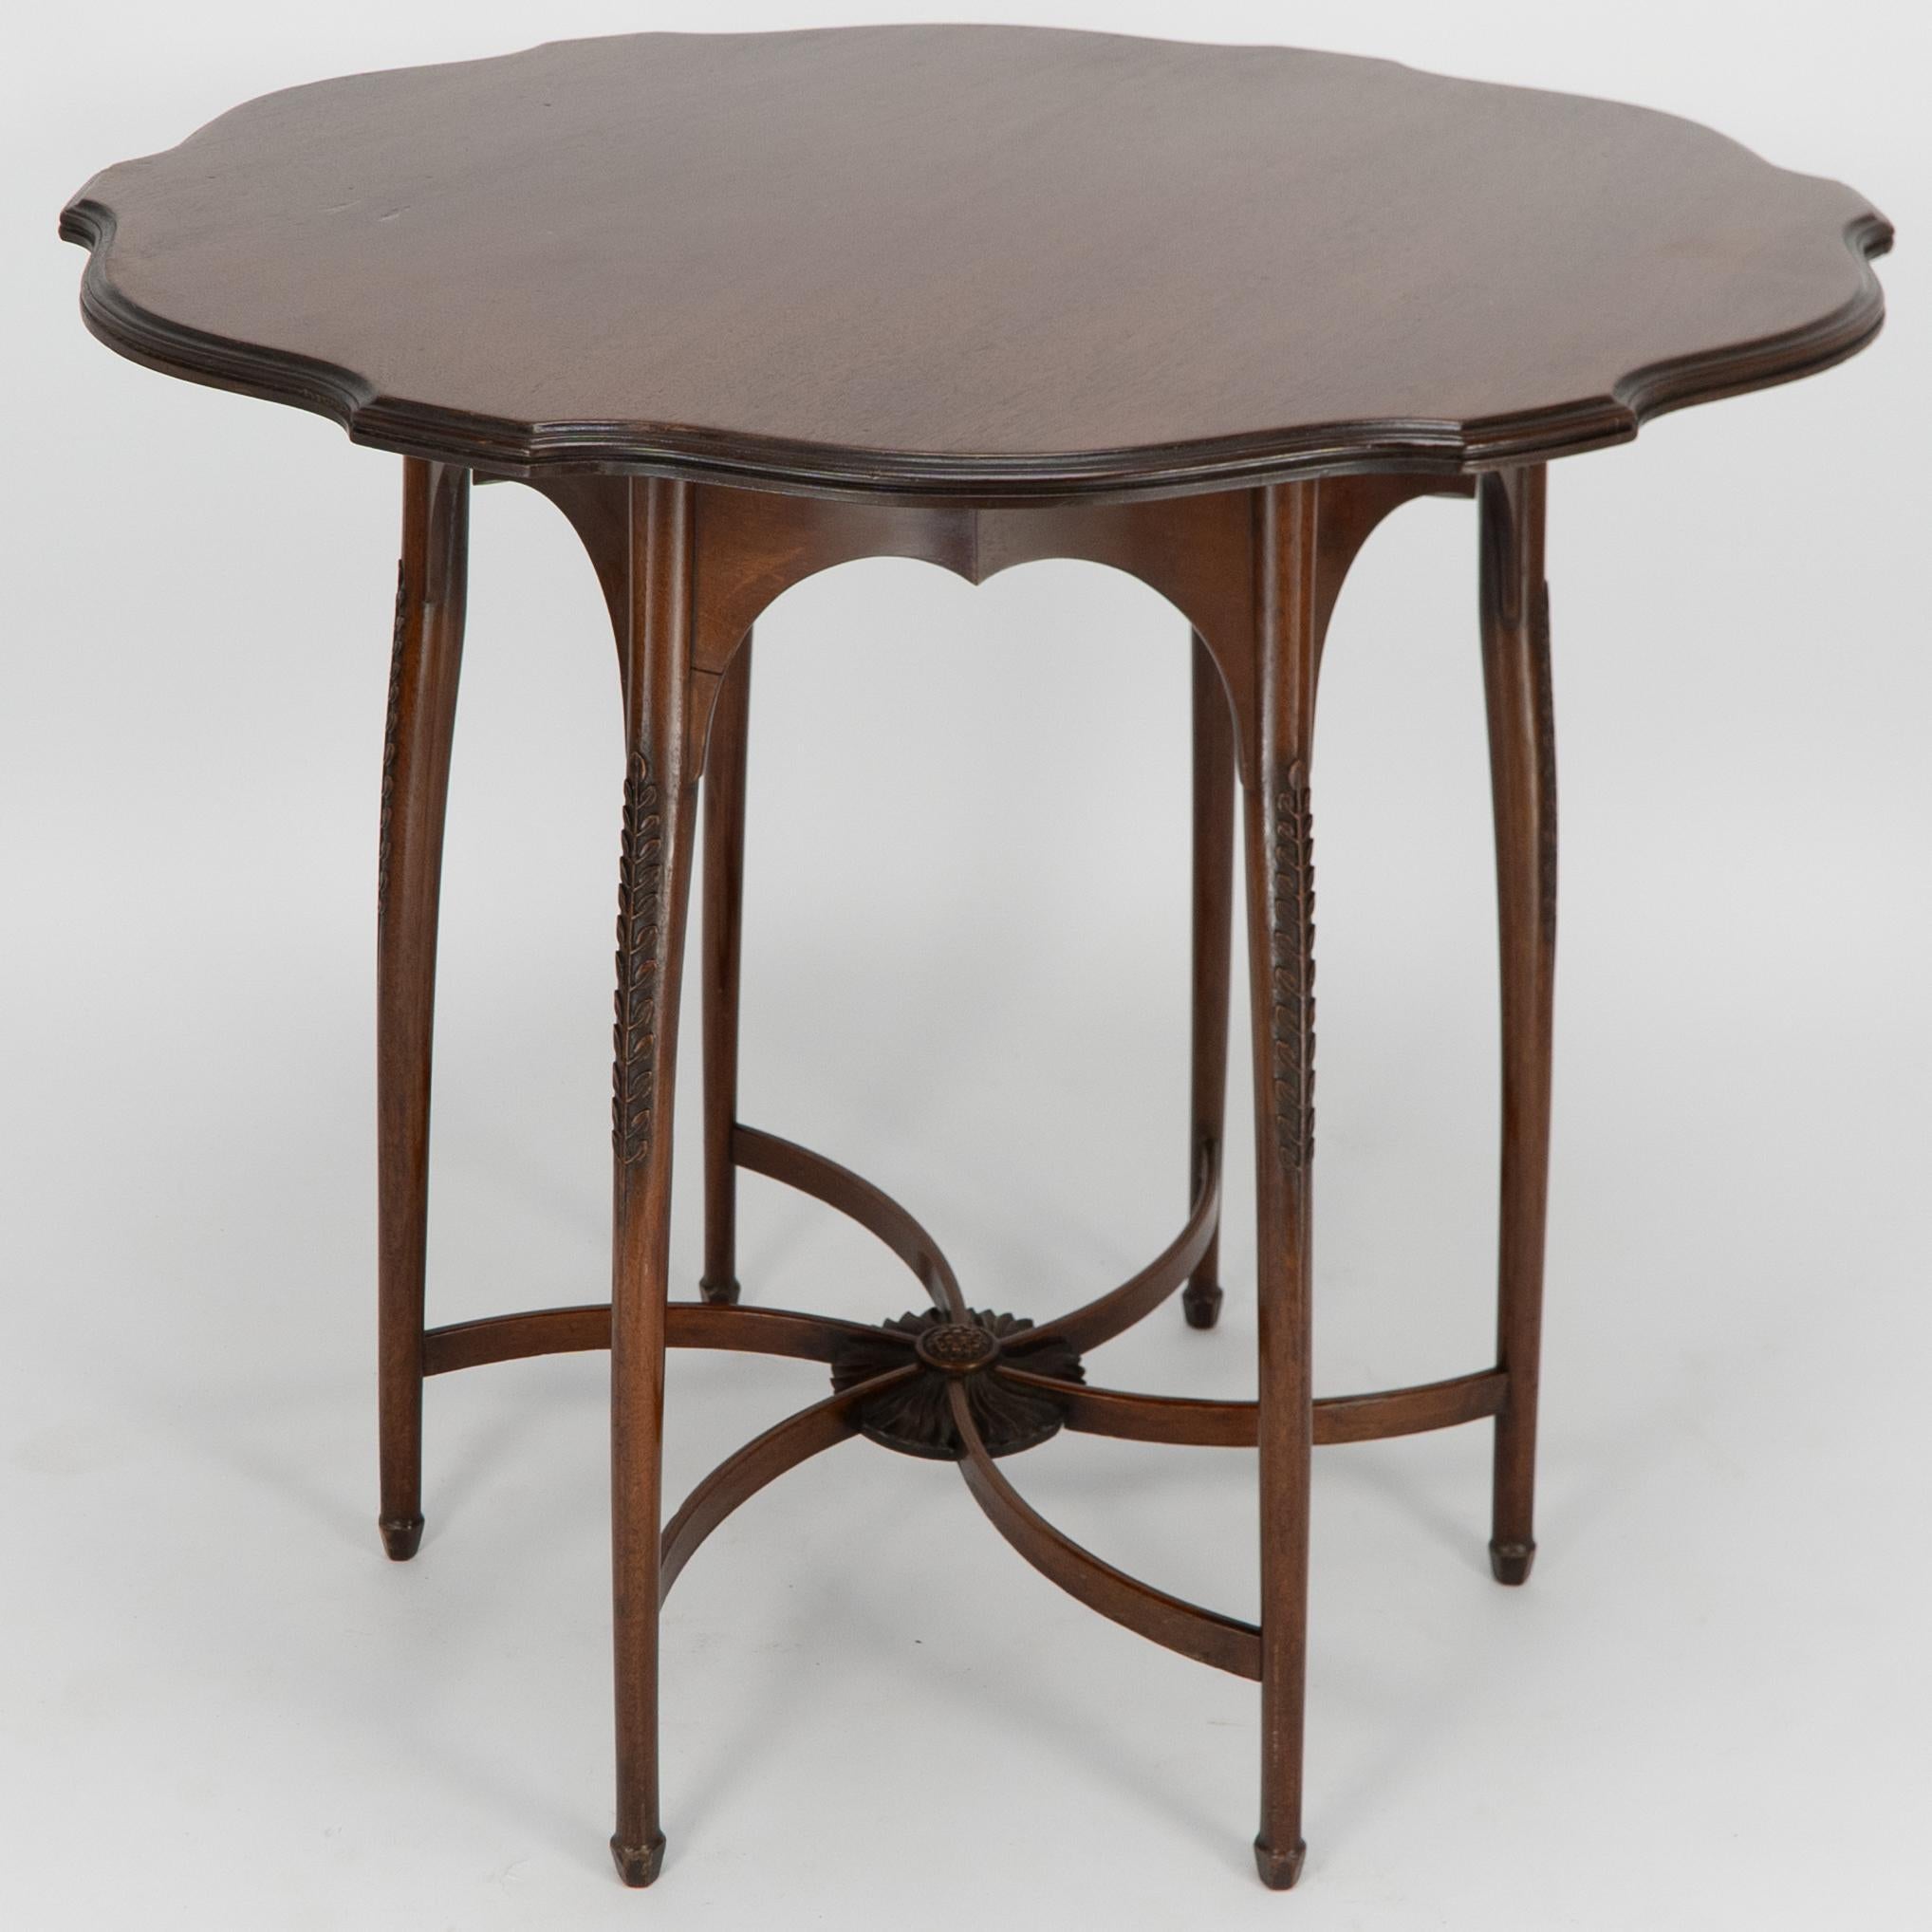 George Jack for Morris and Co. A high Aesthetic Movement circular side table with a shaped top and shaped upper apron standing on six beautifully shaped legs, each with fine carved floral decoration growing up the outer edges, the lower legs united